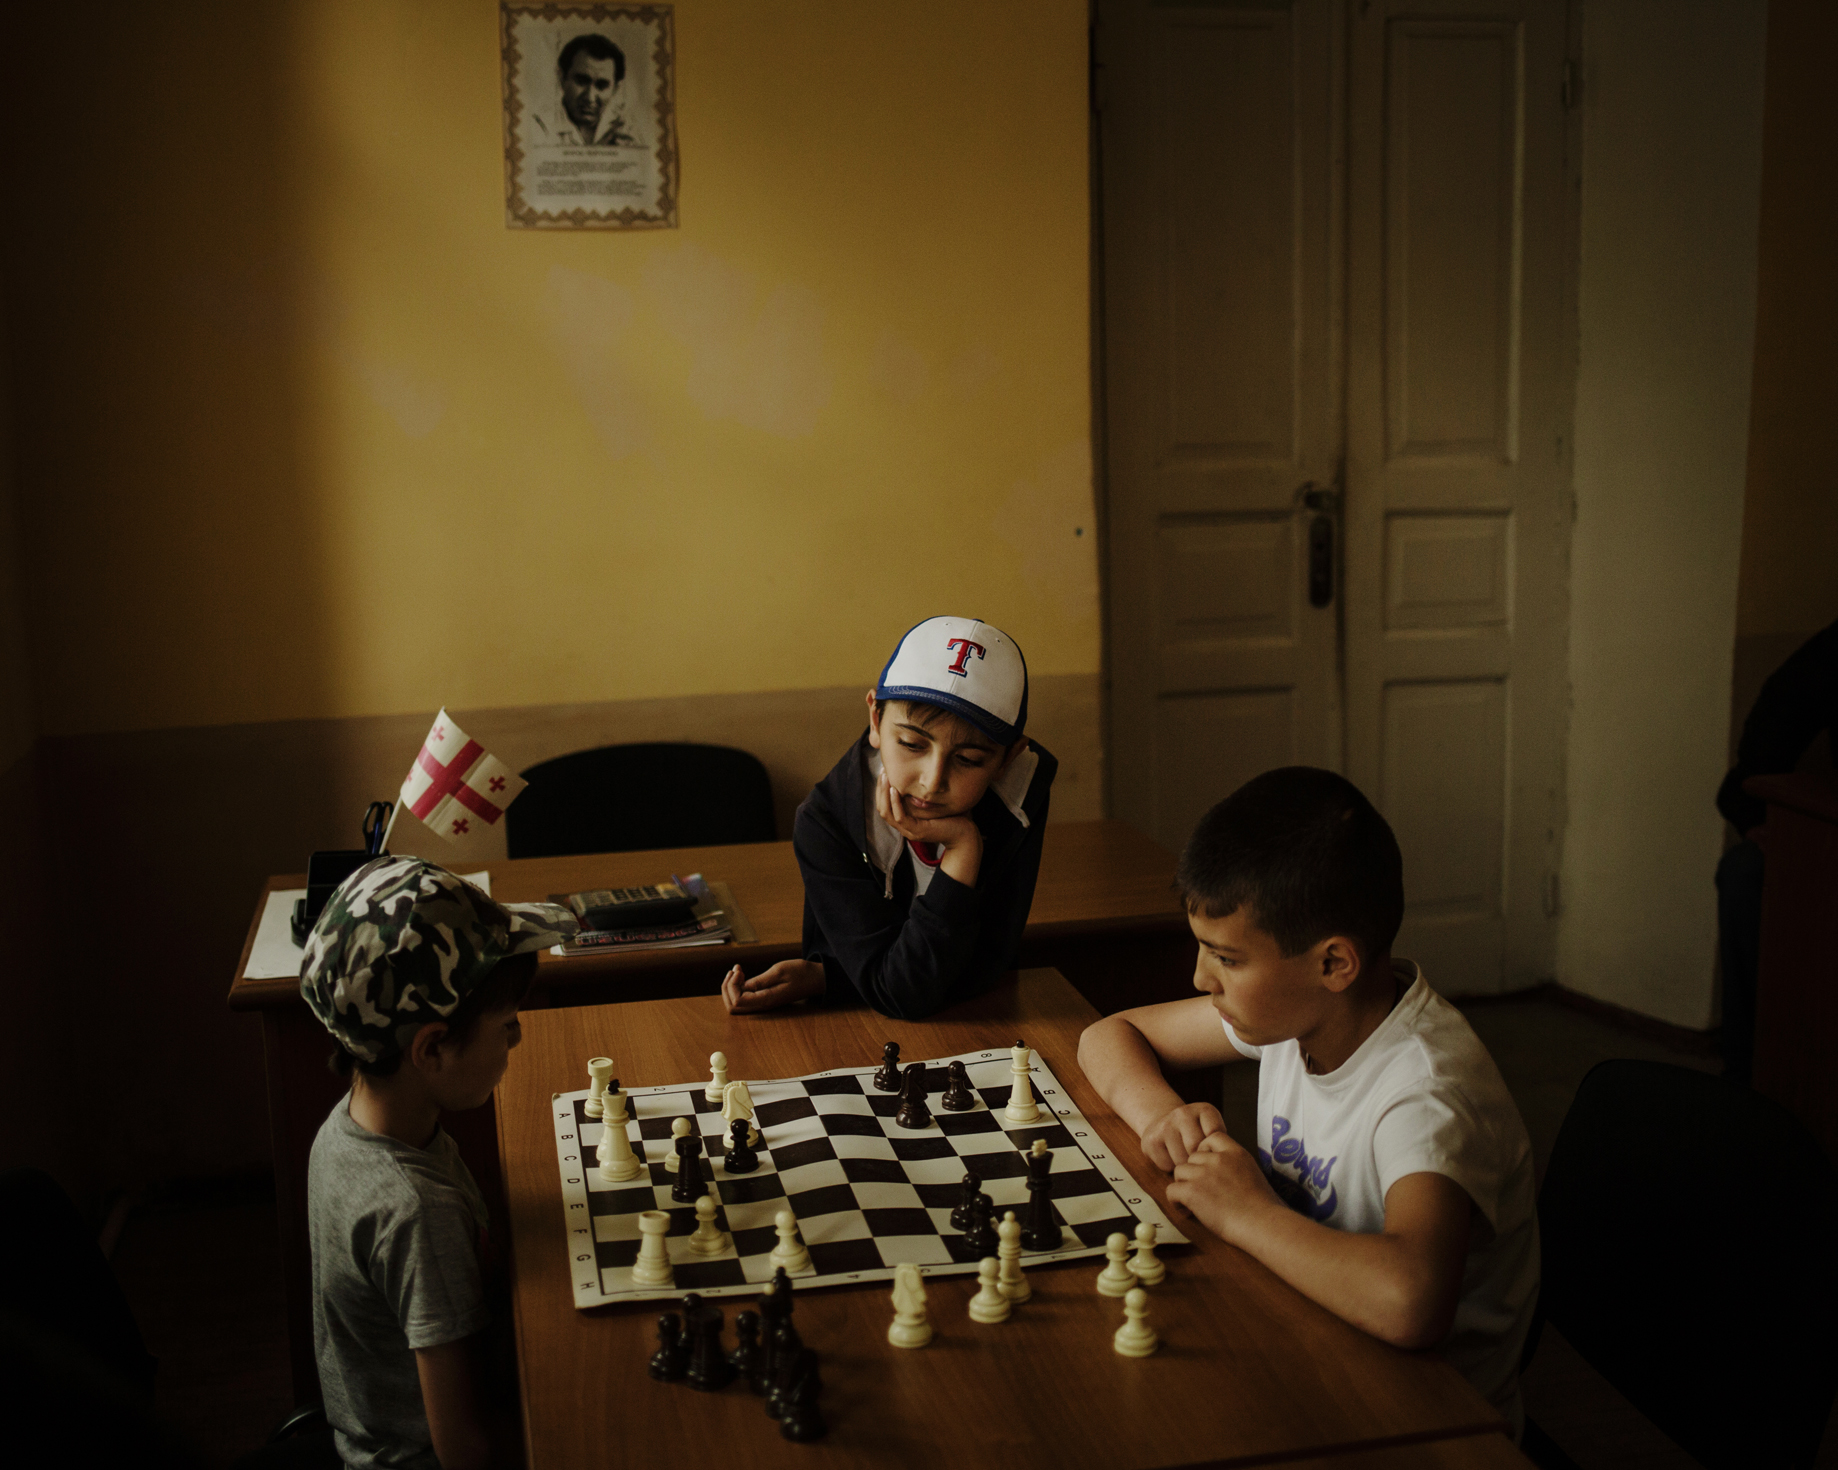  Akhalkalaki. In a chess course for the Armenian community. Chess is a kind of national sport for Armenians. In Armenia it is taught at school like mathematics or history. 